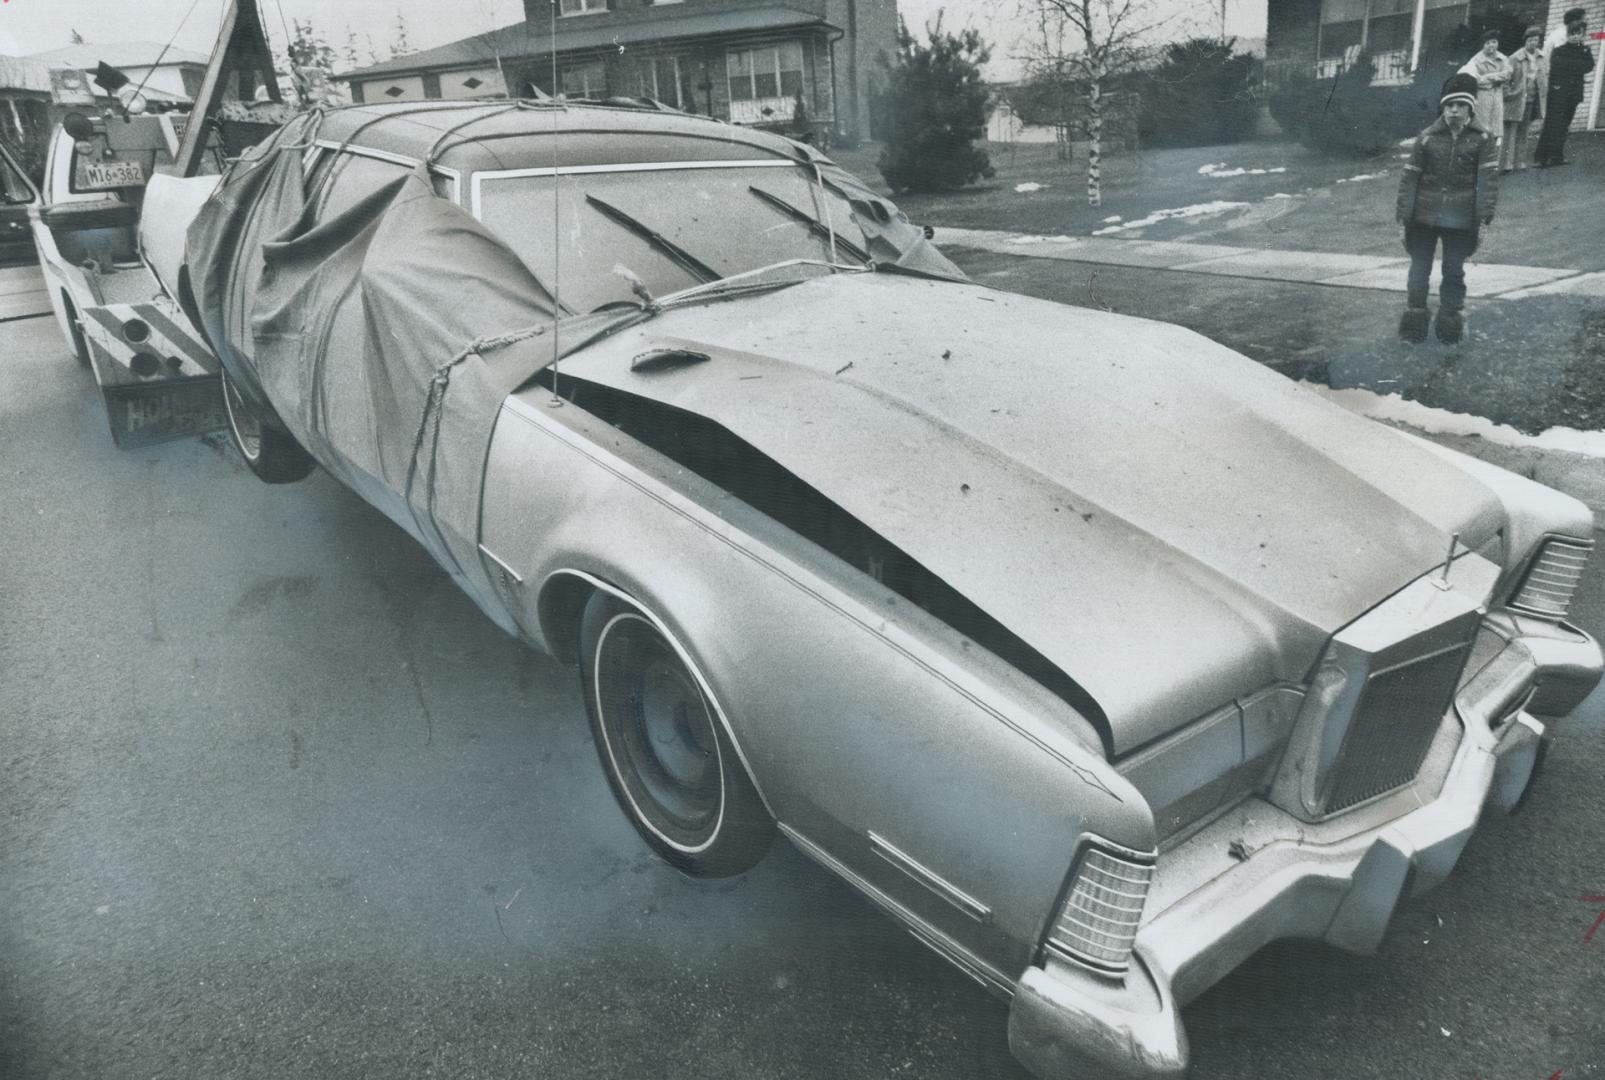 The Bomb that blew part of the leg off convicted bookmaker Walter Chomski of Mississauga left a hole in the floor of his 1973 blue Lincoln Continental(...)